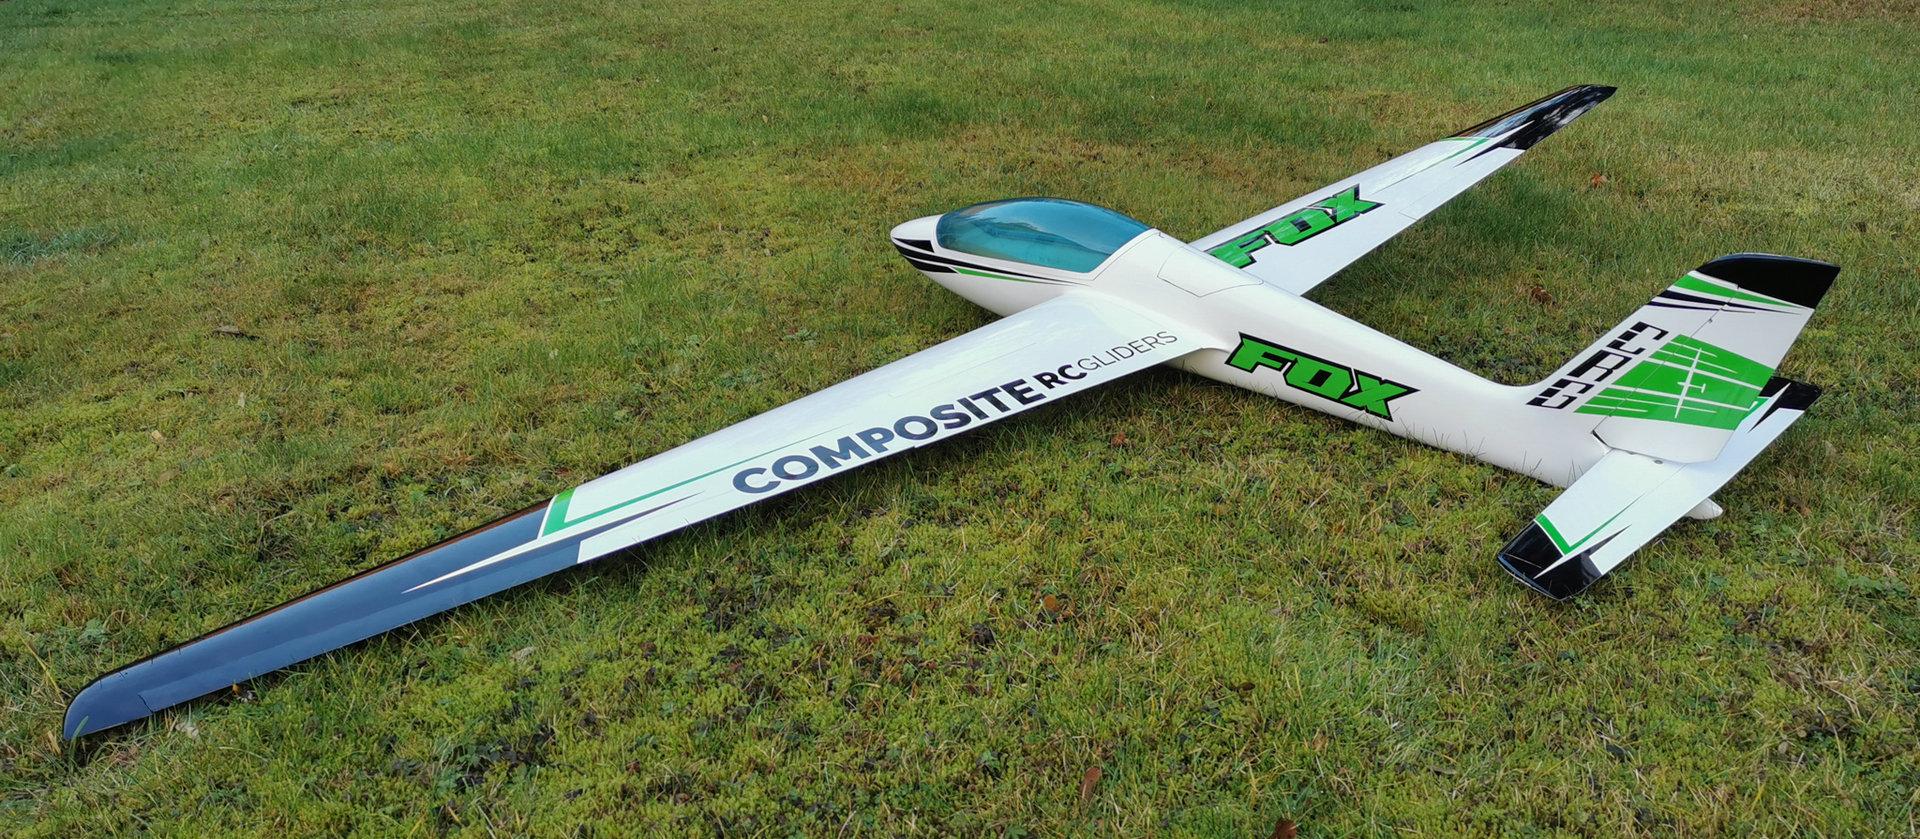 Fox Rc Glider:  Output without quotes, new lines and line breaks.Expected price and availability for Fox RC glider